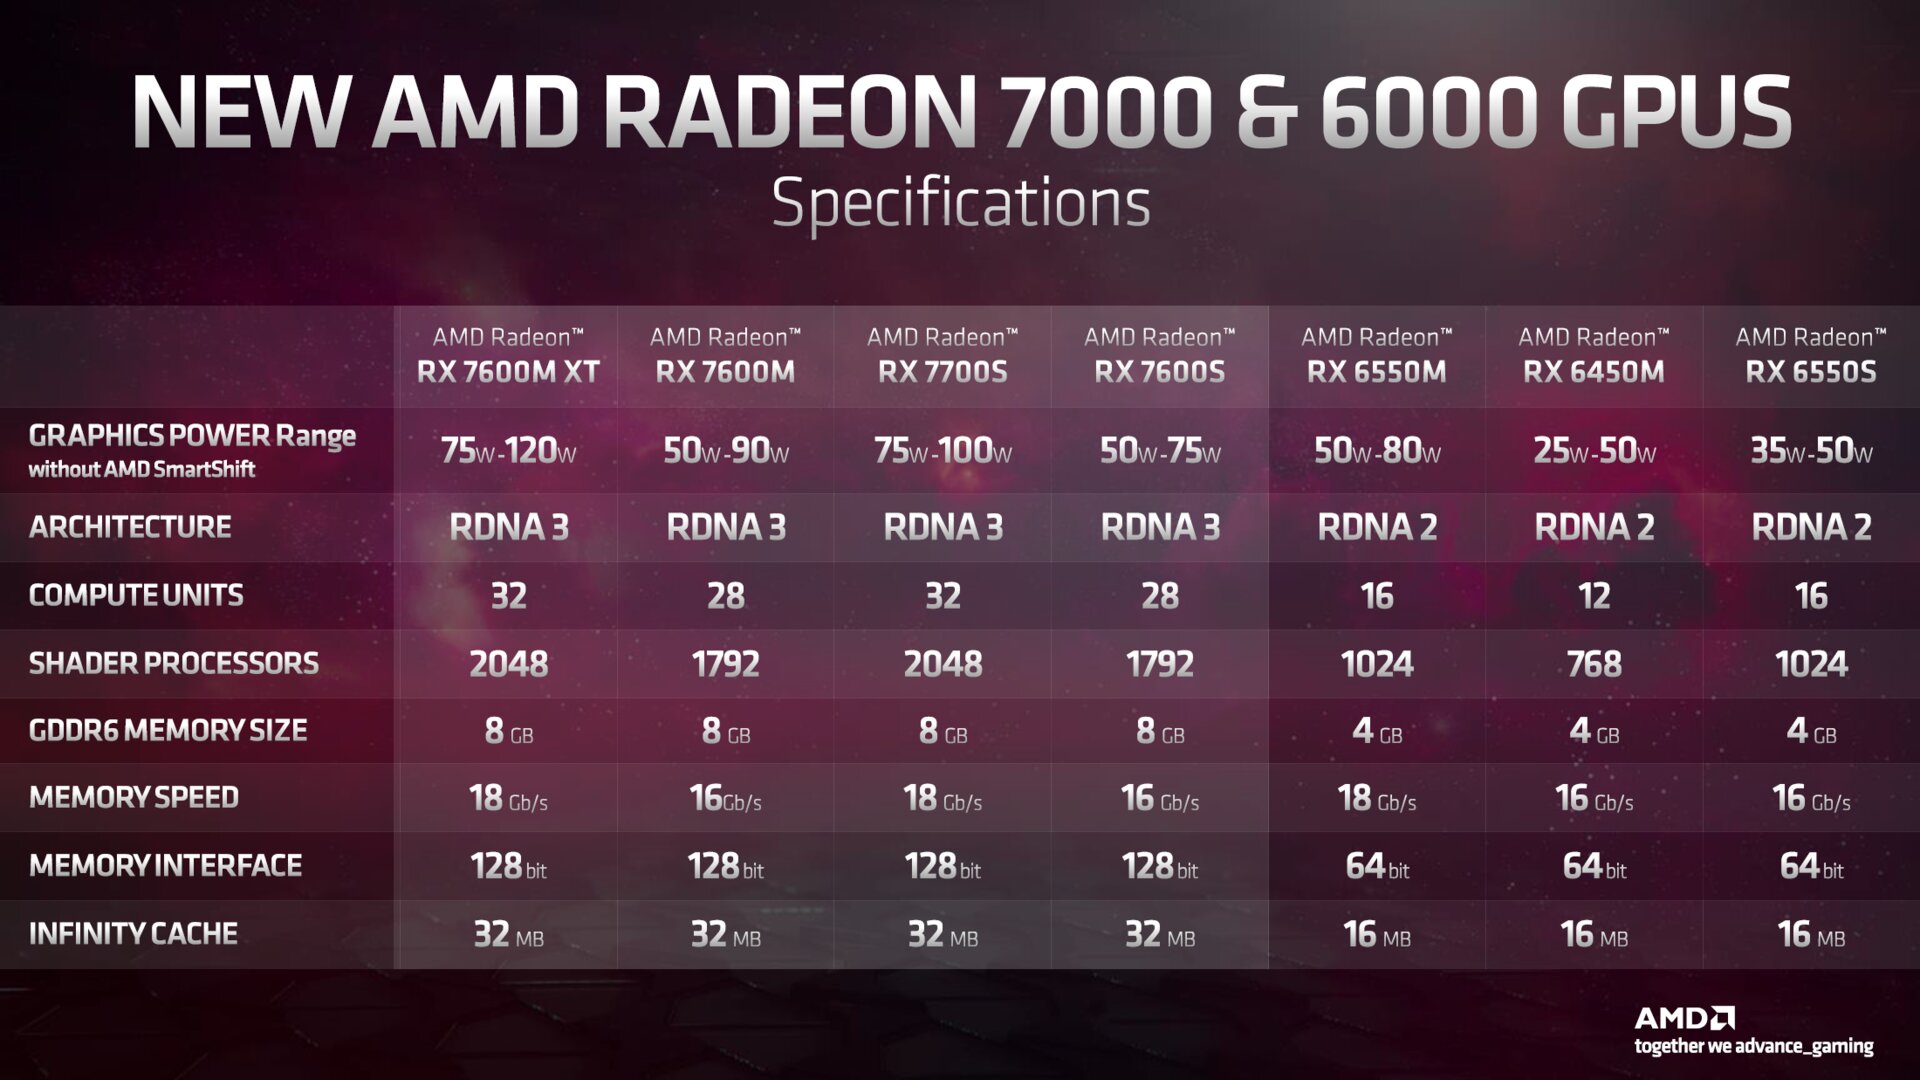 Specifications of the Radeon RX 7000 Mobile